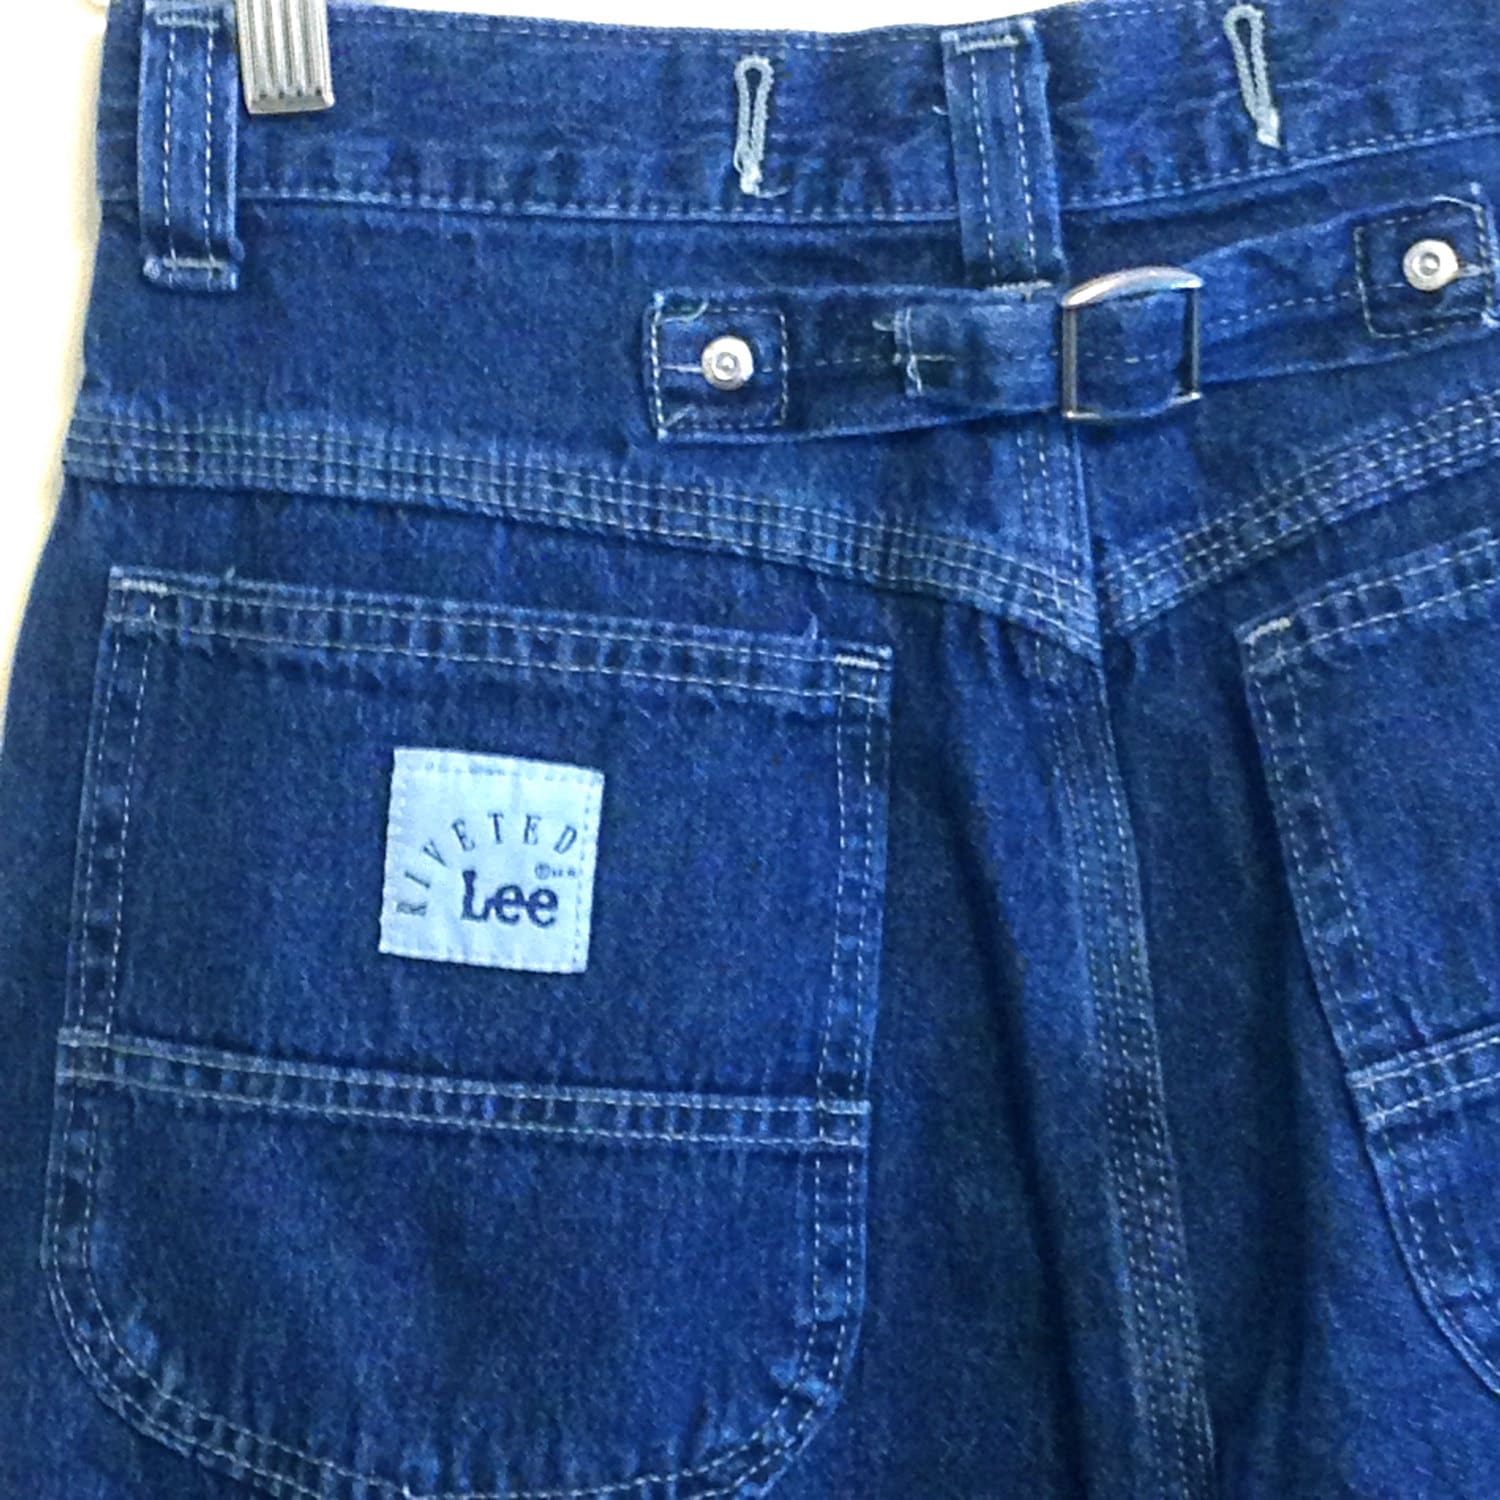 Baggy 90s Jeans, Vintage Lee Jeans, 90s Mom Jeans, High Waisted ...